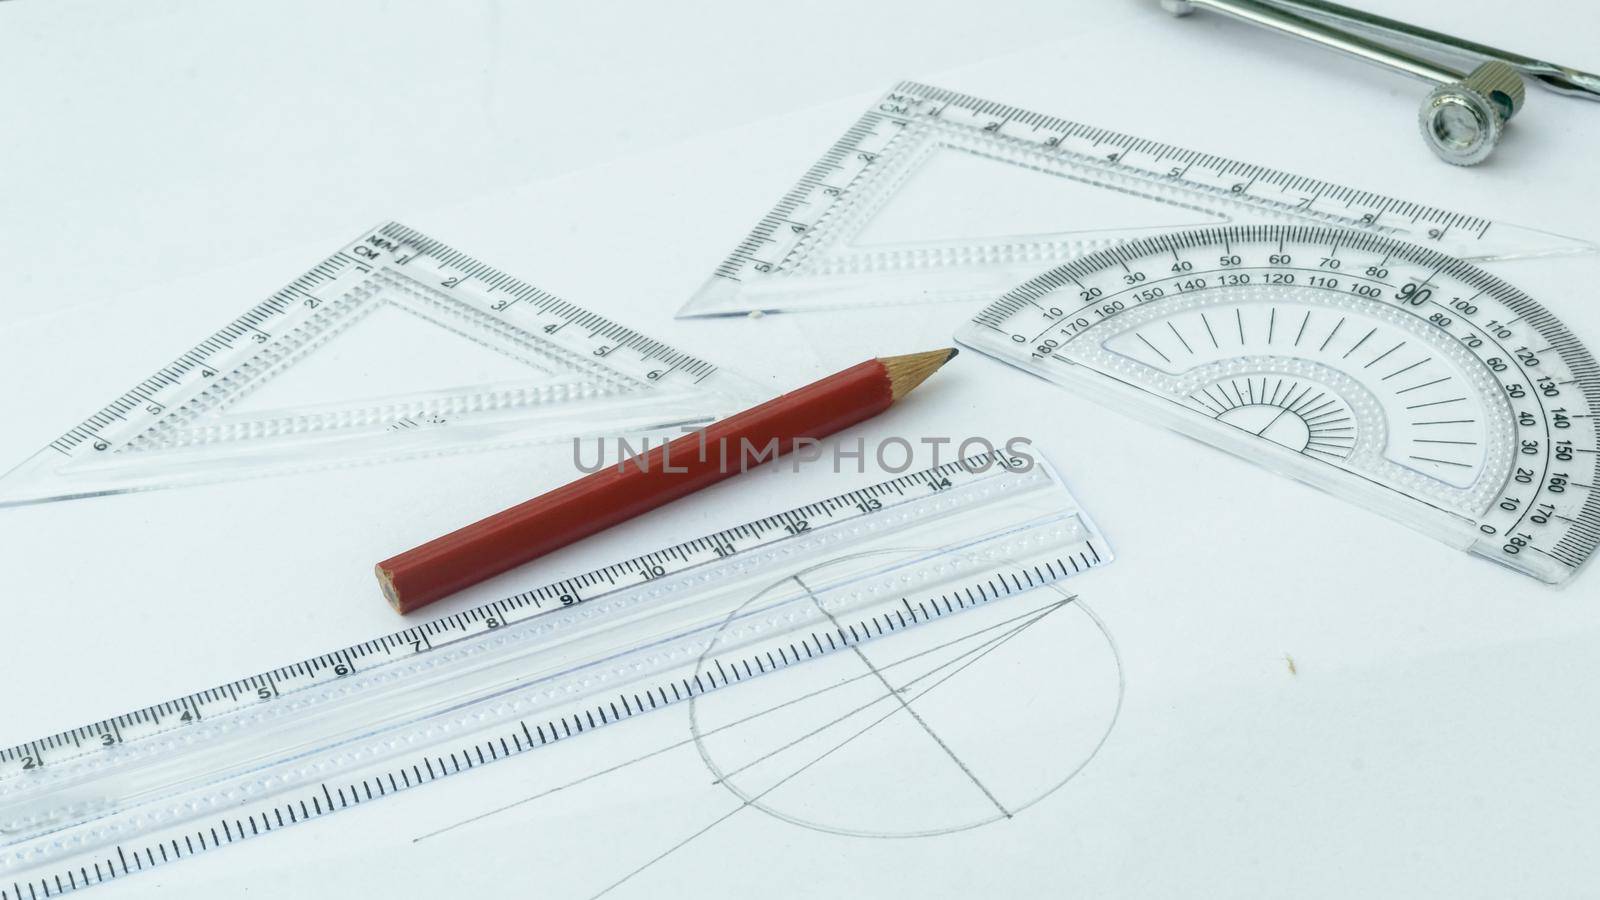 Design Professional services drawing tools close up by sudiptabhowmick